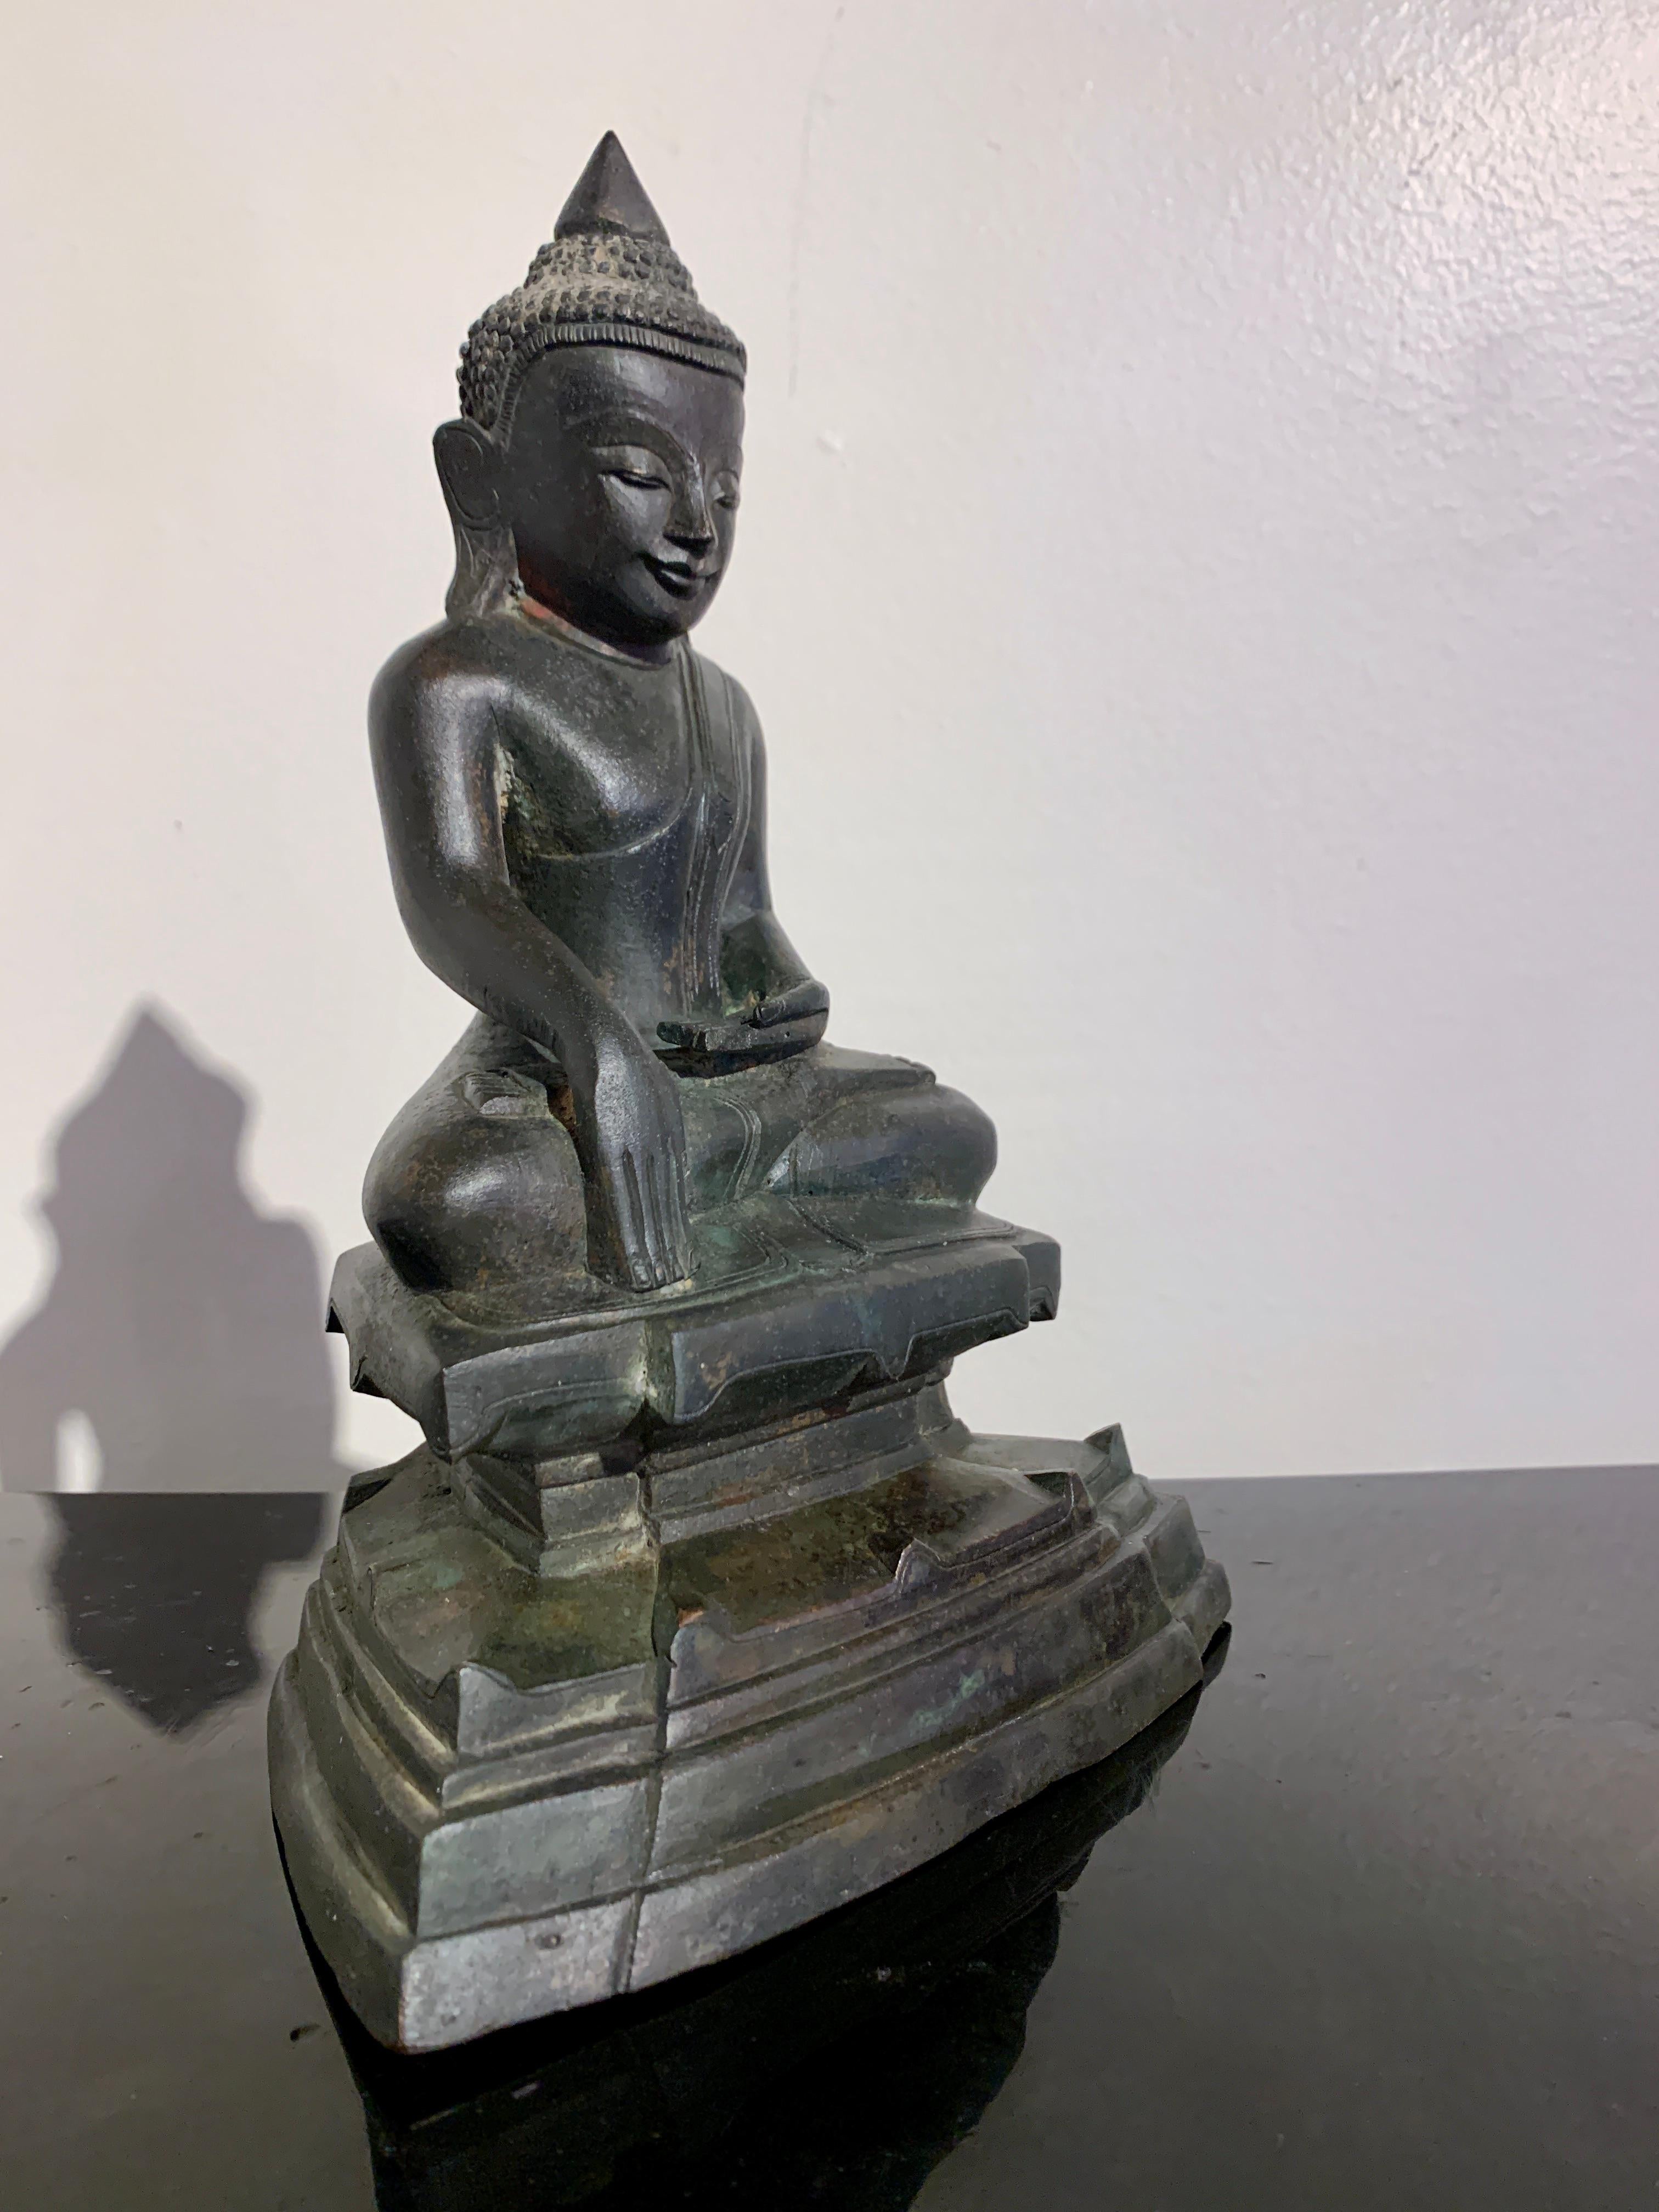 A nice and classic Burmese Shan cast bronze Buddha in the Ava style, 19th century or earlier, Burma. 

The Buddha sits upon a stepped and waisted stylized double lotus pedestal, legs in the full lotus position, his hands performing bhumisparsha